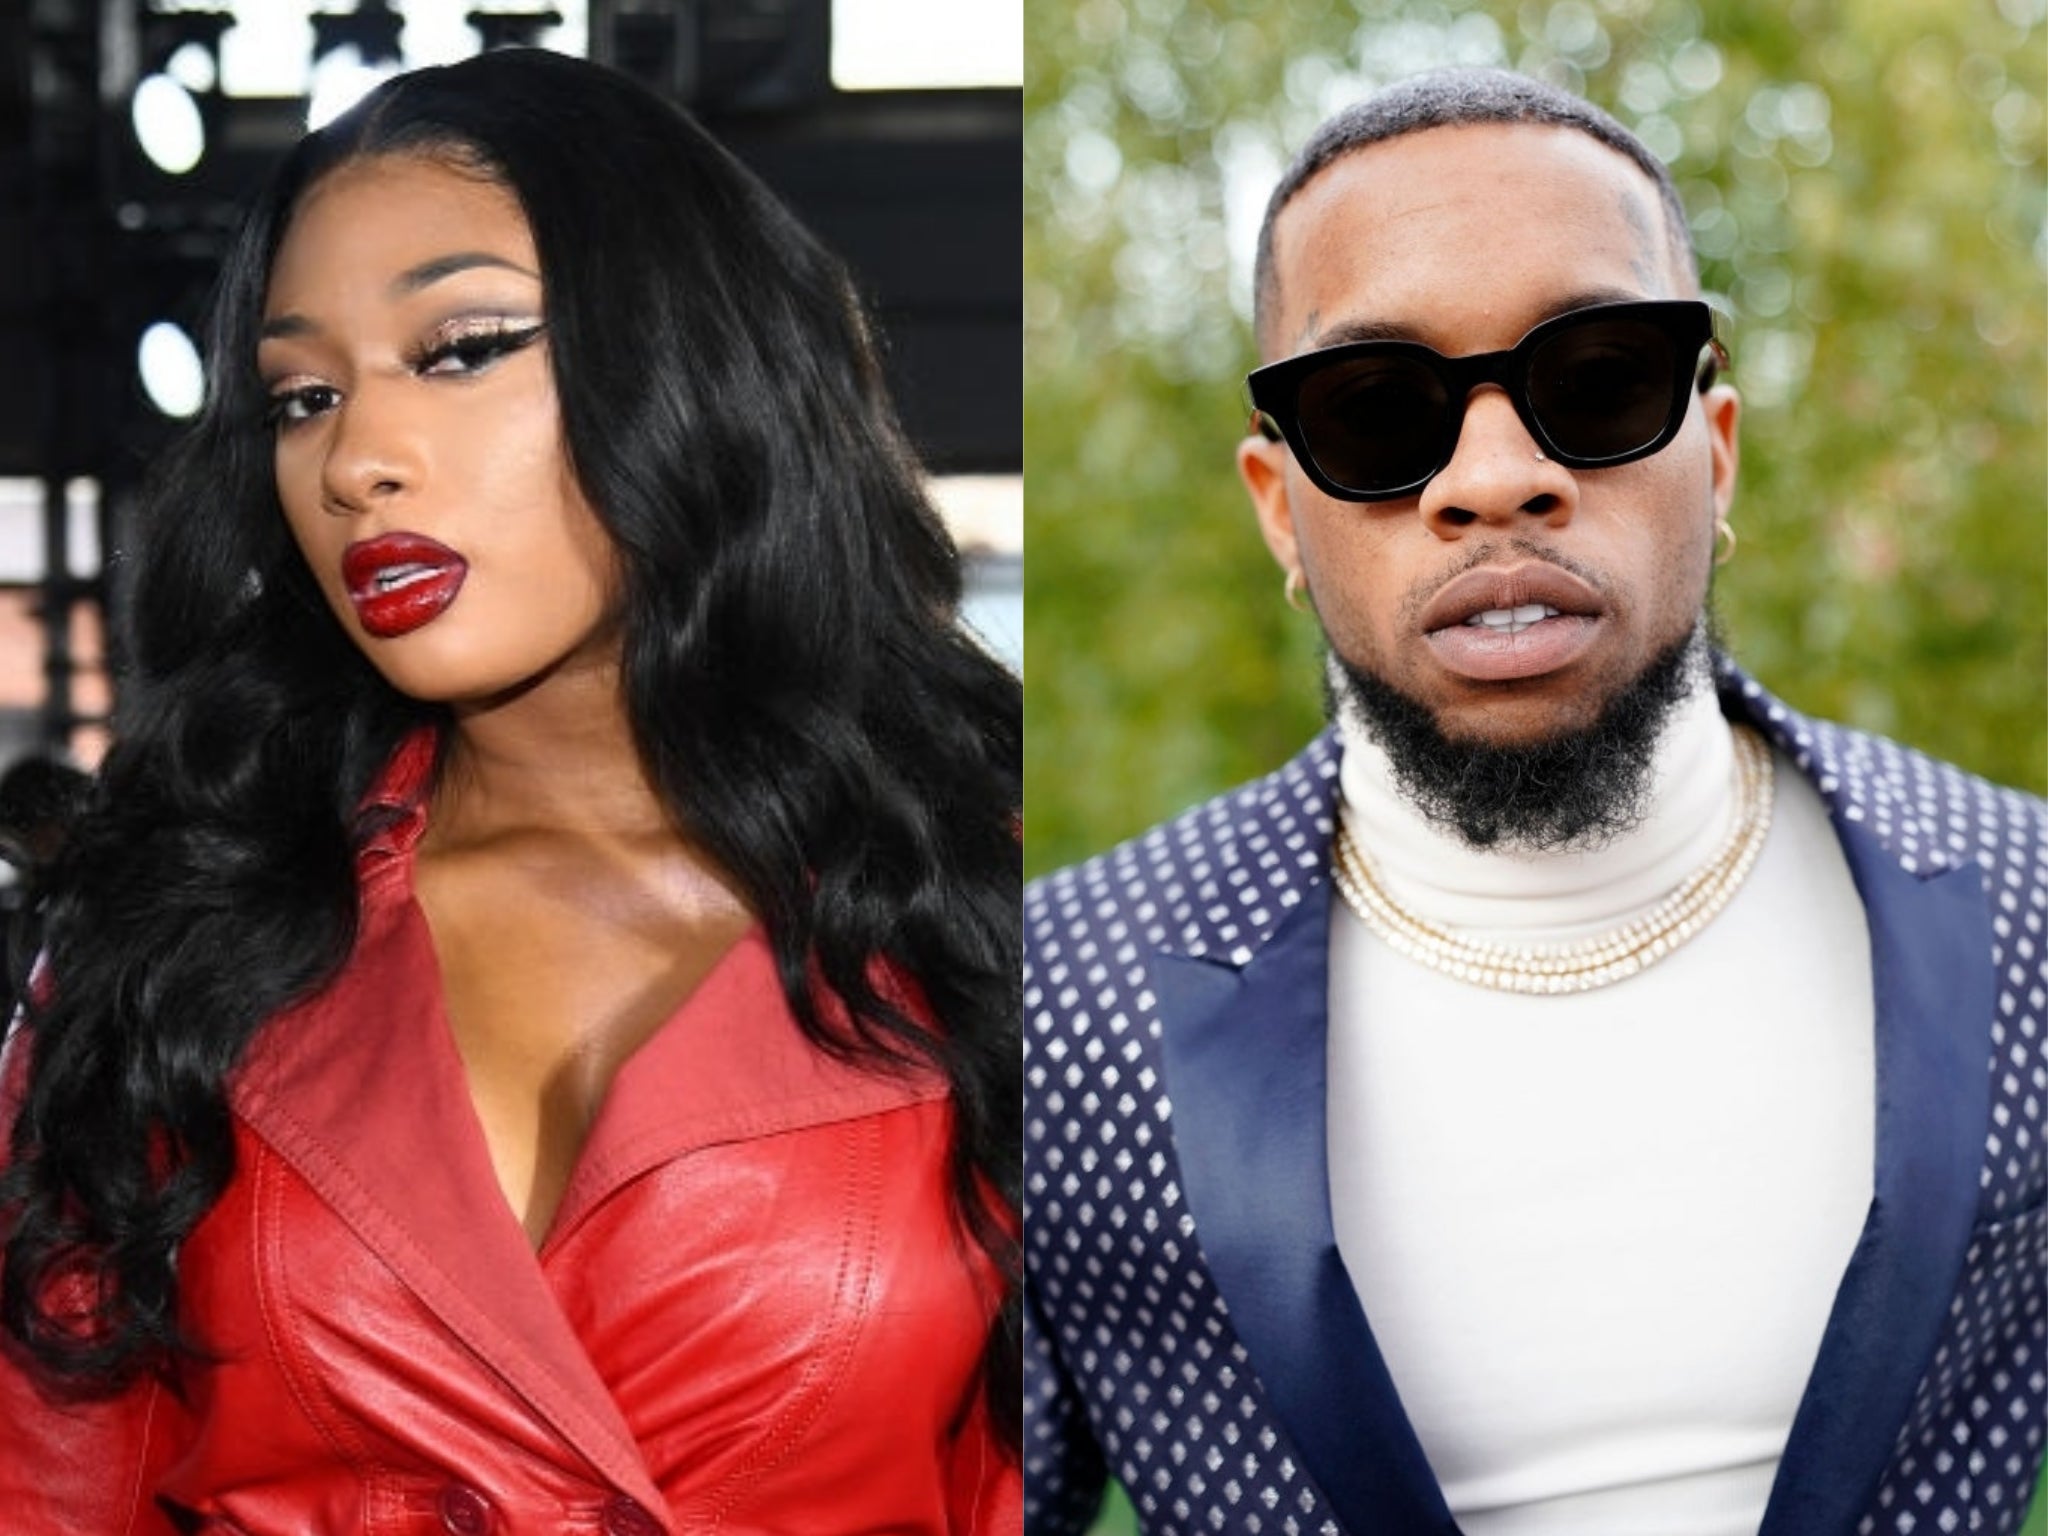 Megan Thee Stallion shooting: Tory Lanez charged with assaulting rapper  with gun | The Independent